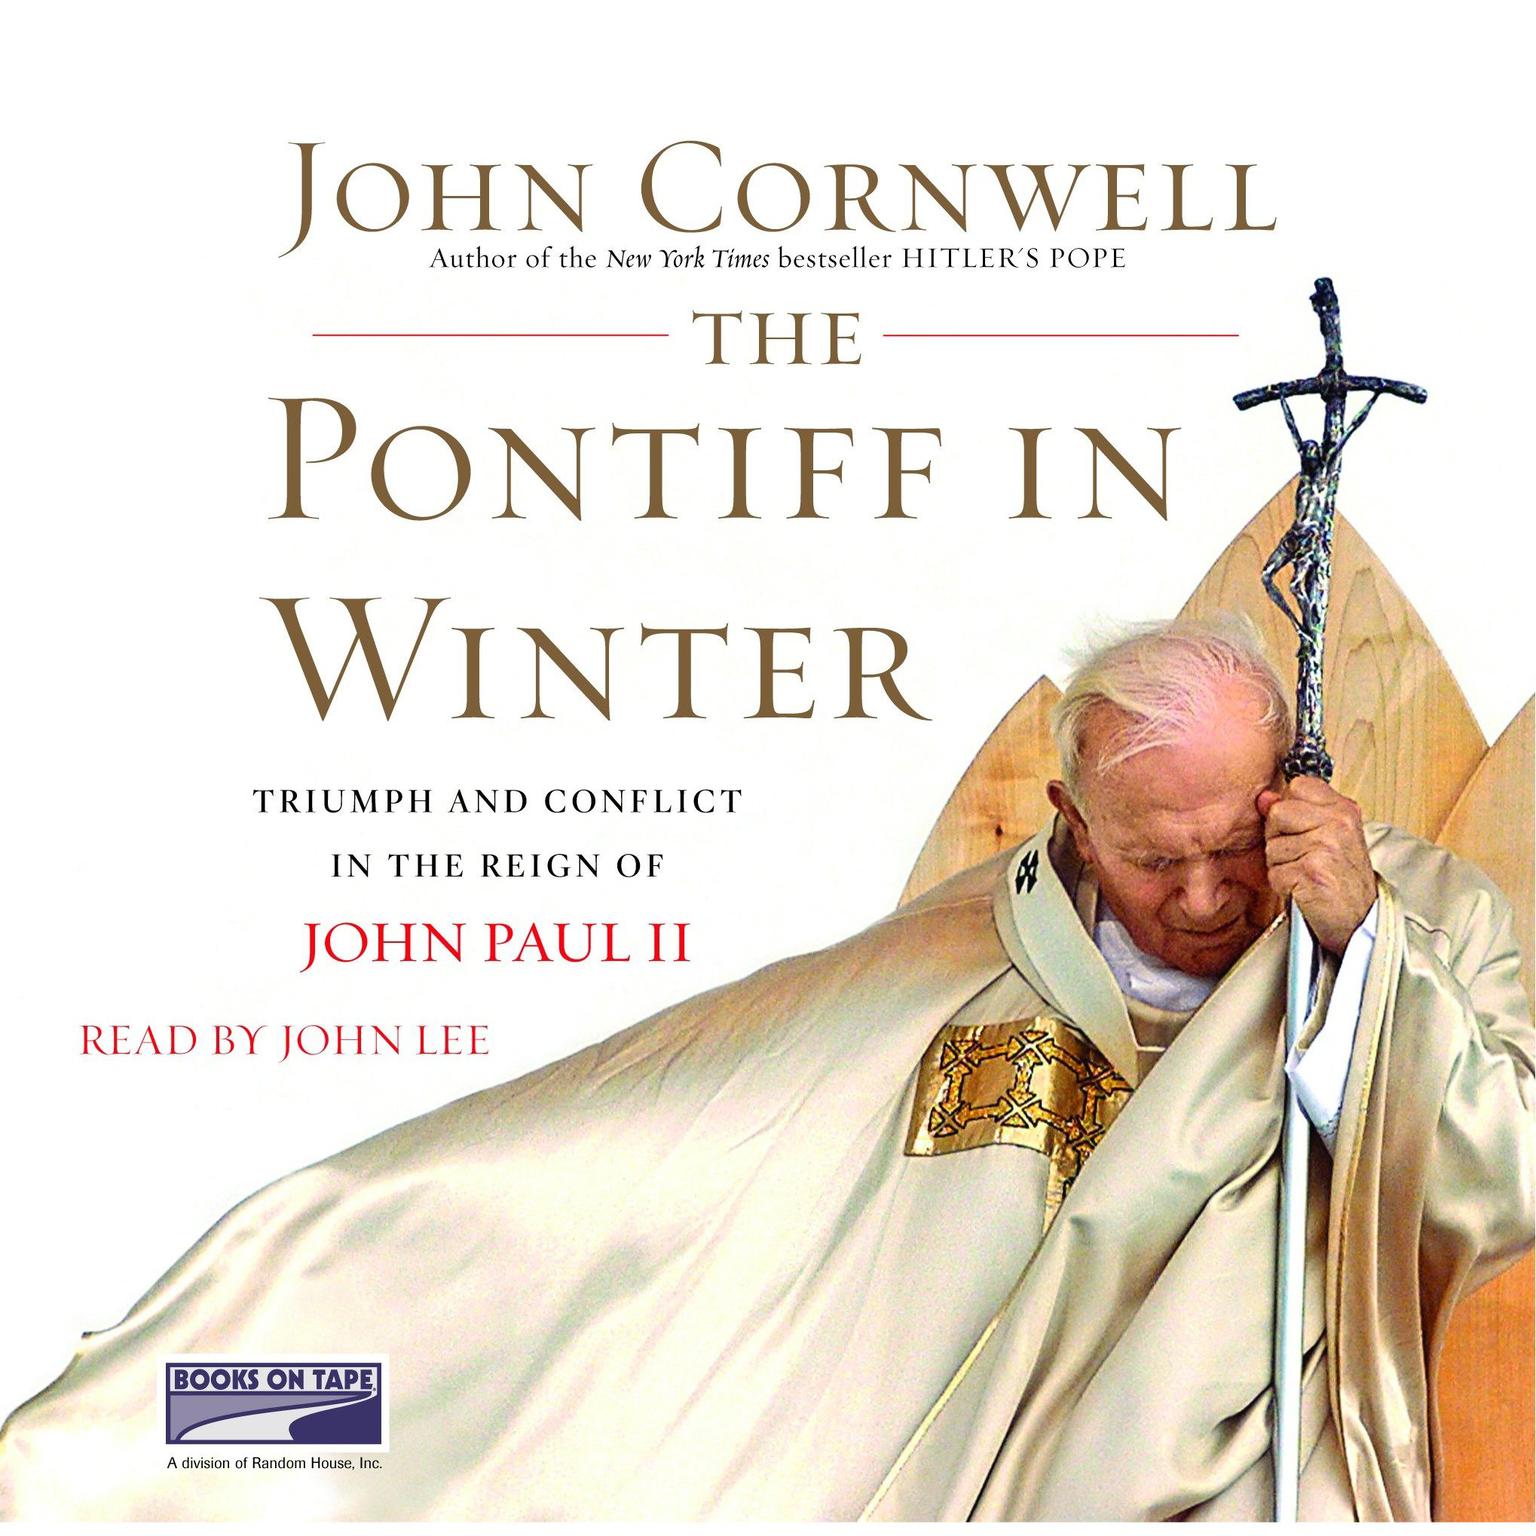 The Pontiff in Winter: Triumph and Conflict in the Reign of John Paul II Audiobook, by John Cornwell